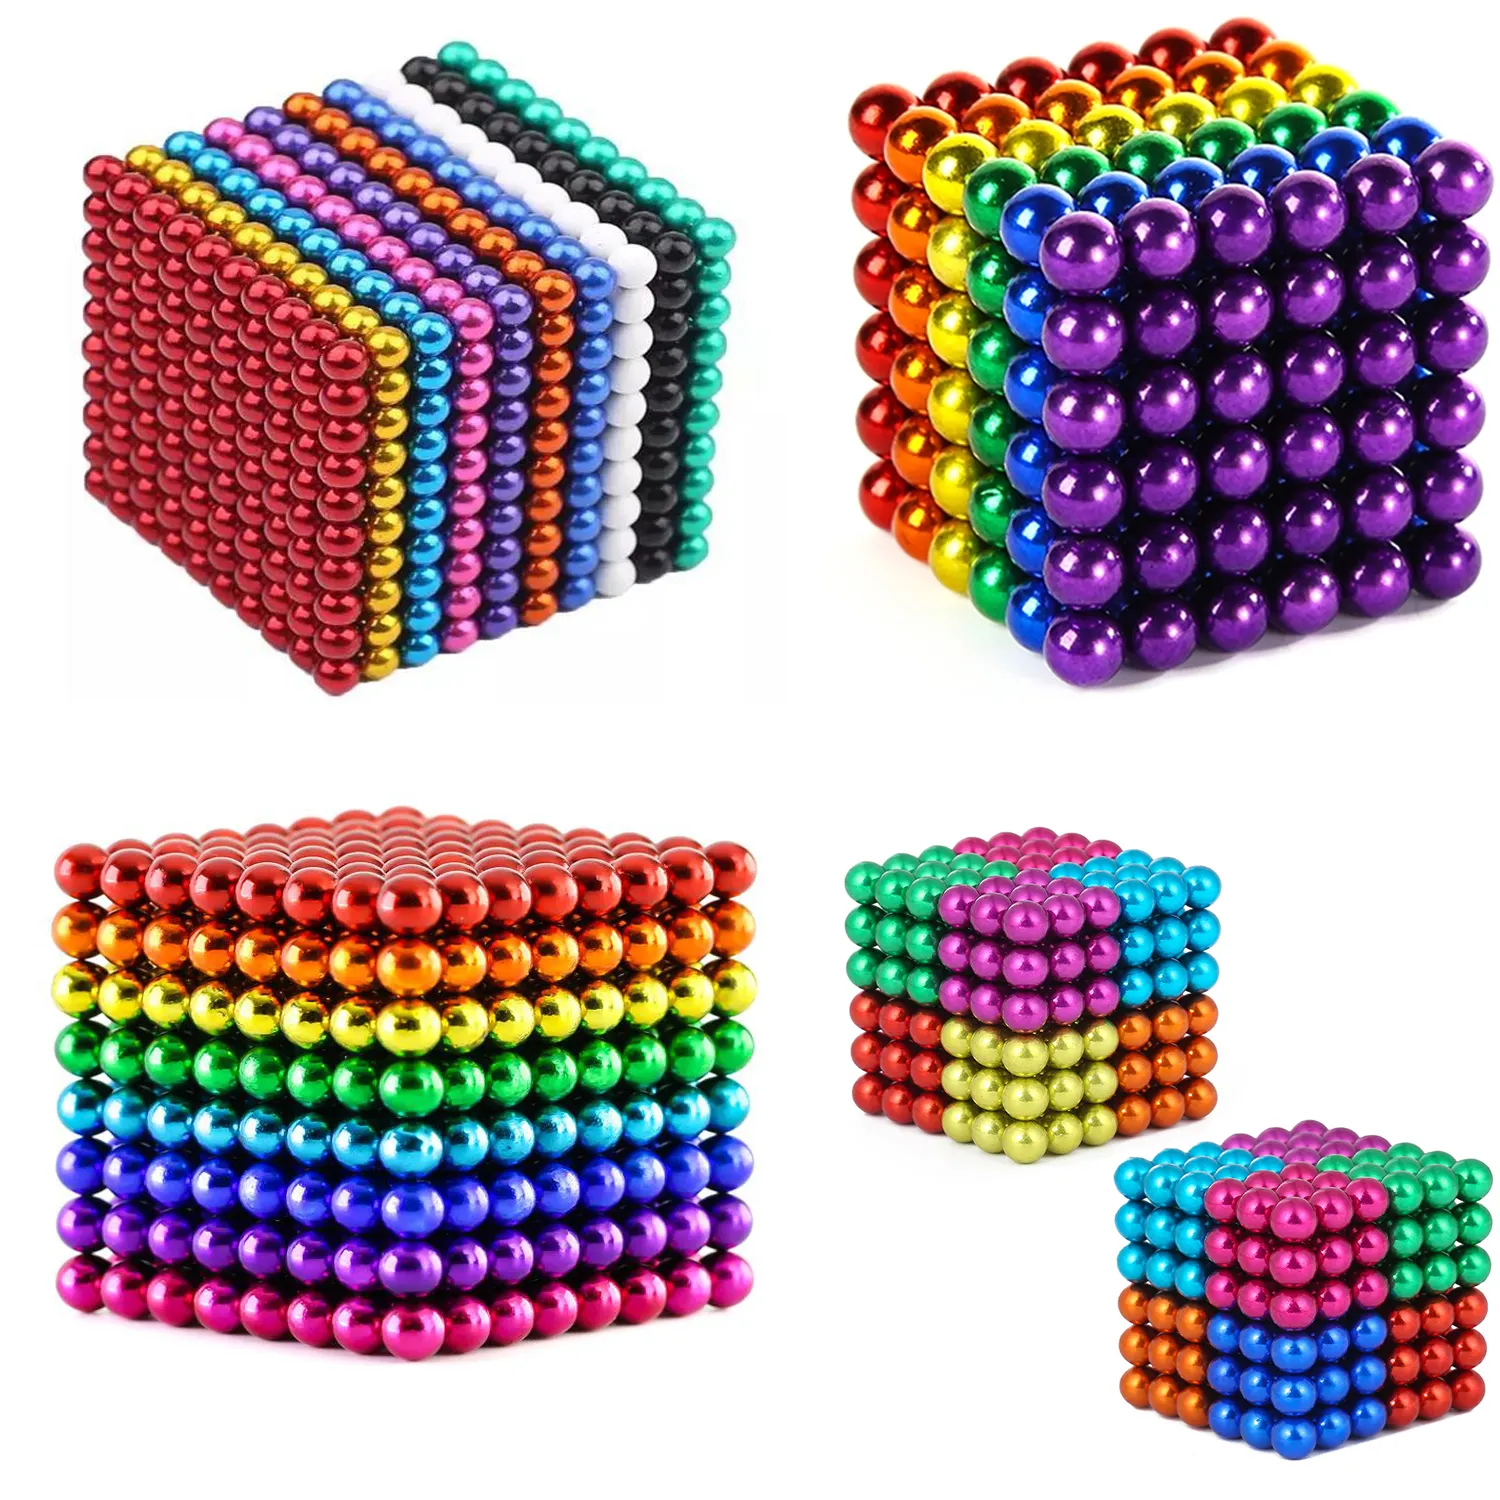 25 Years Factory Wholesale Colour Neodymium Magnet Sphere Bucky Rainbow Magnetic Balls Magnetic Bar Buckyball